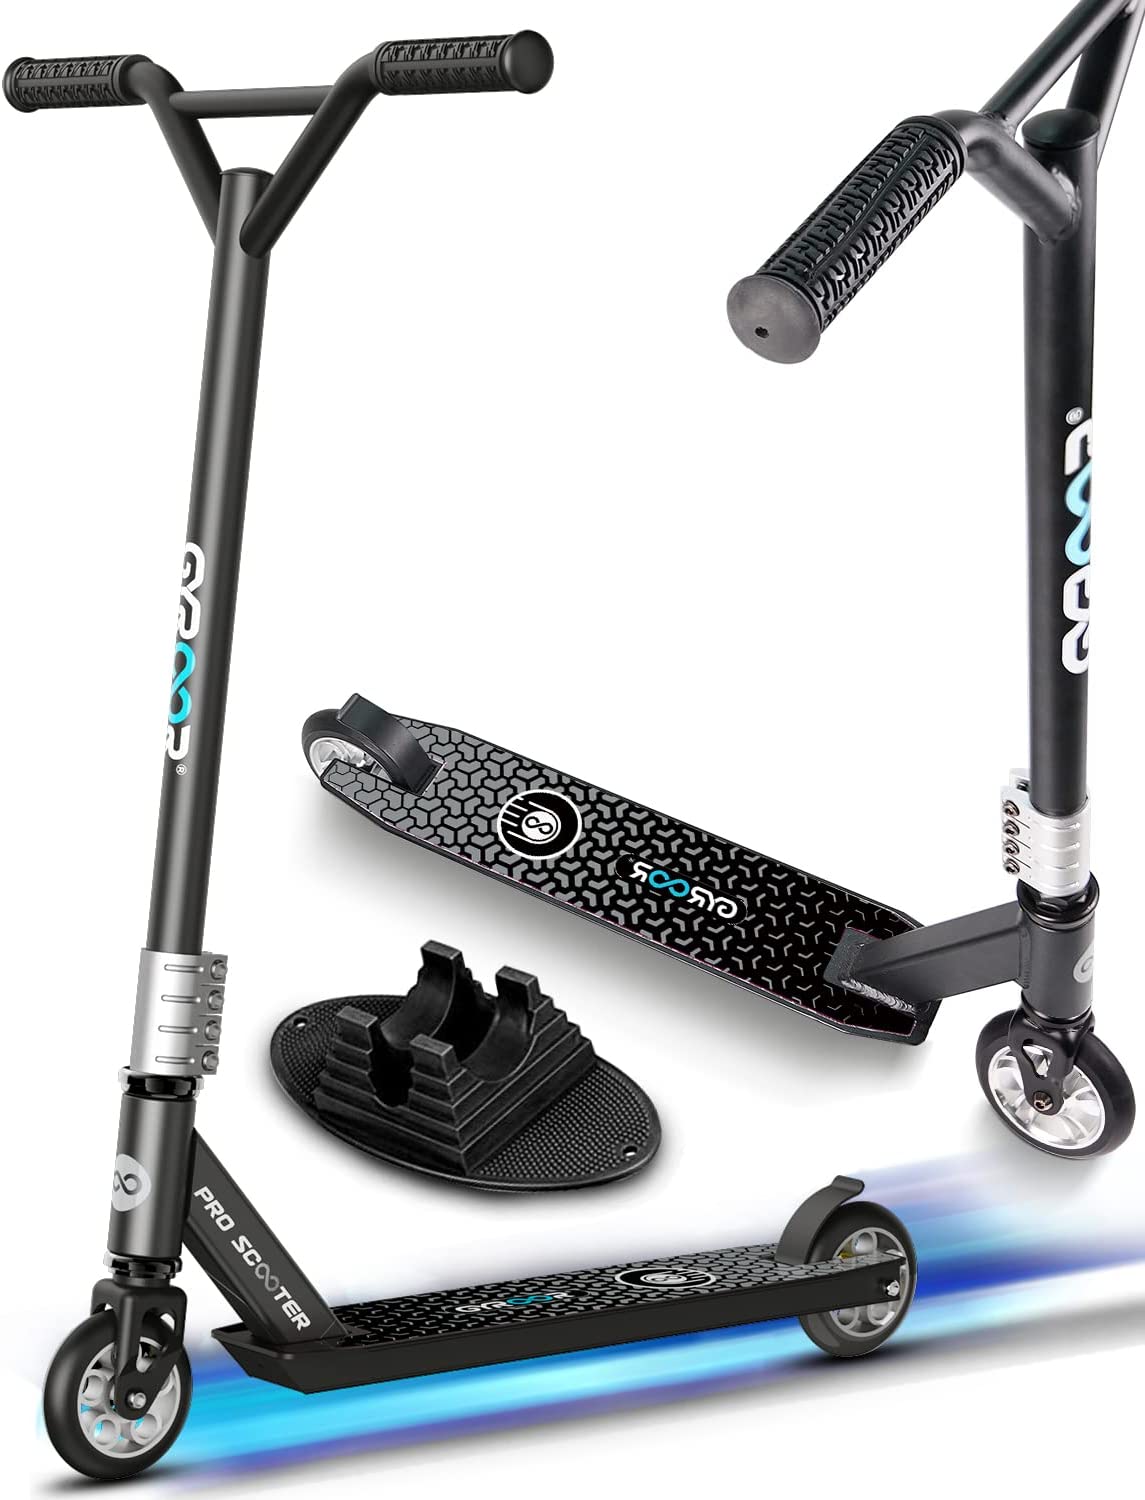 Pro scooter - stunt scooter - trick scooter - Gyroor Z1 scooter - silver